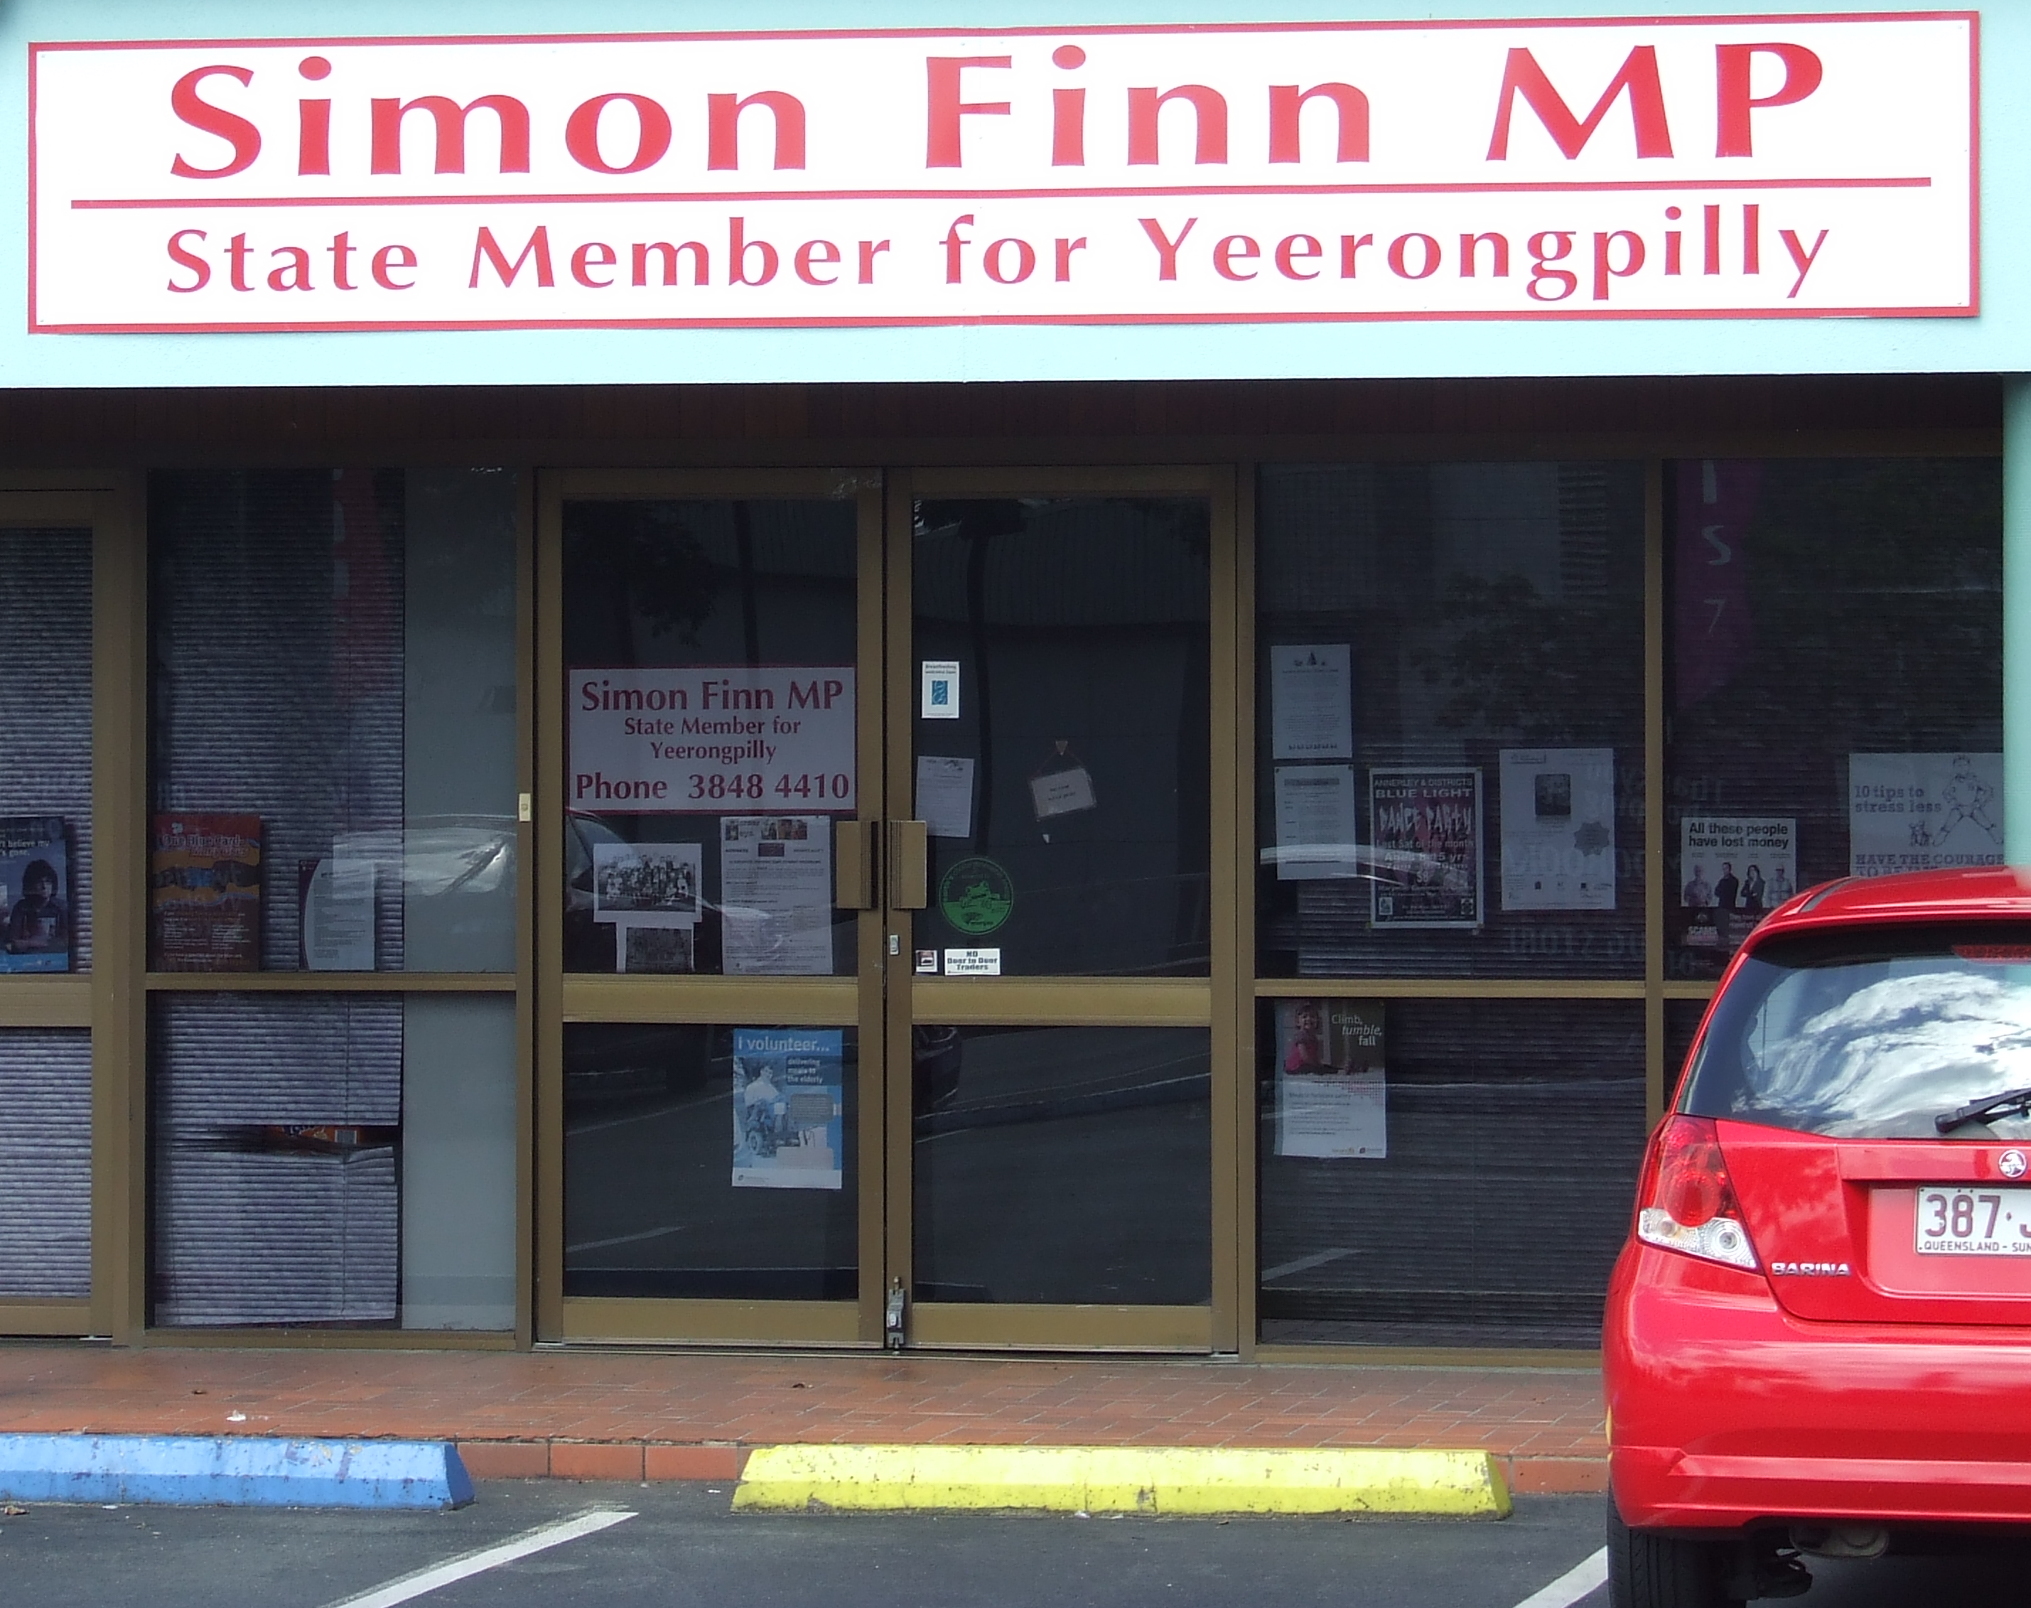 the front entrance to a state member for verognilly